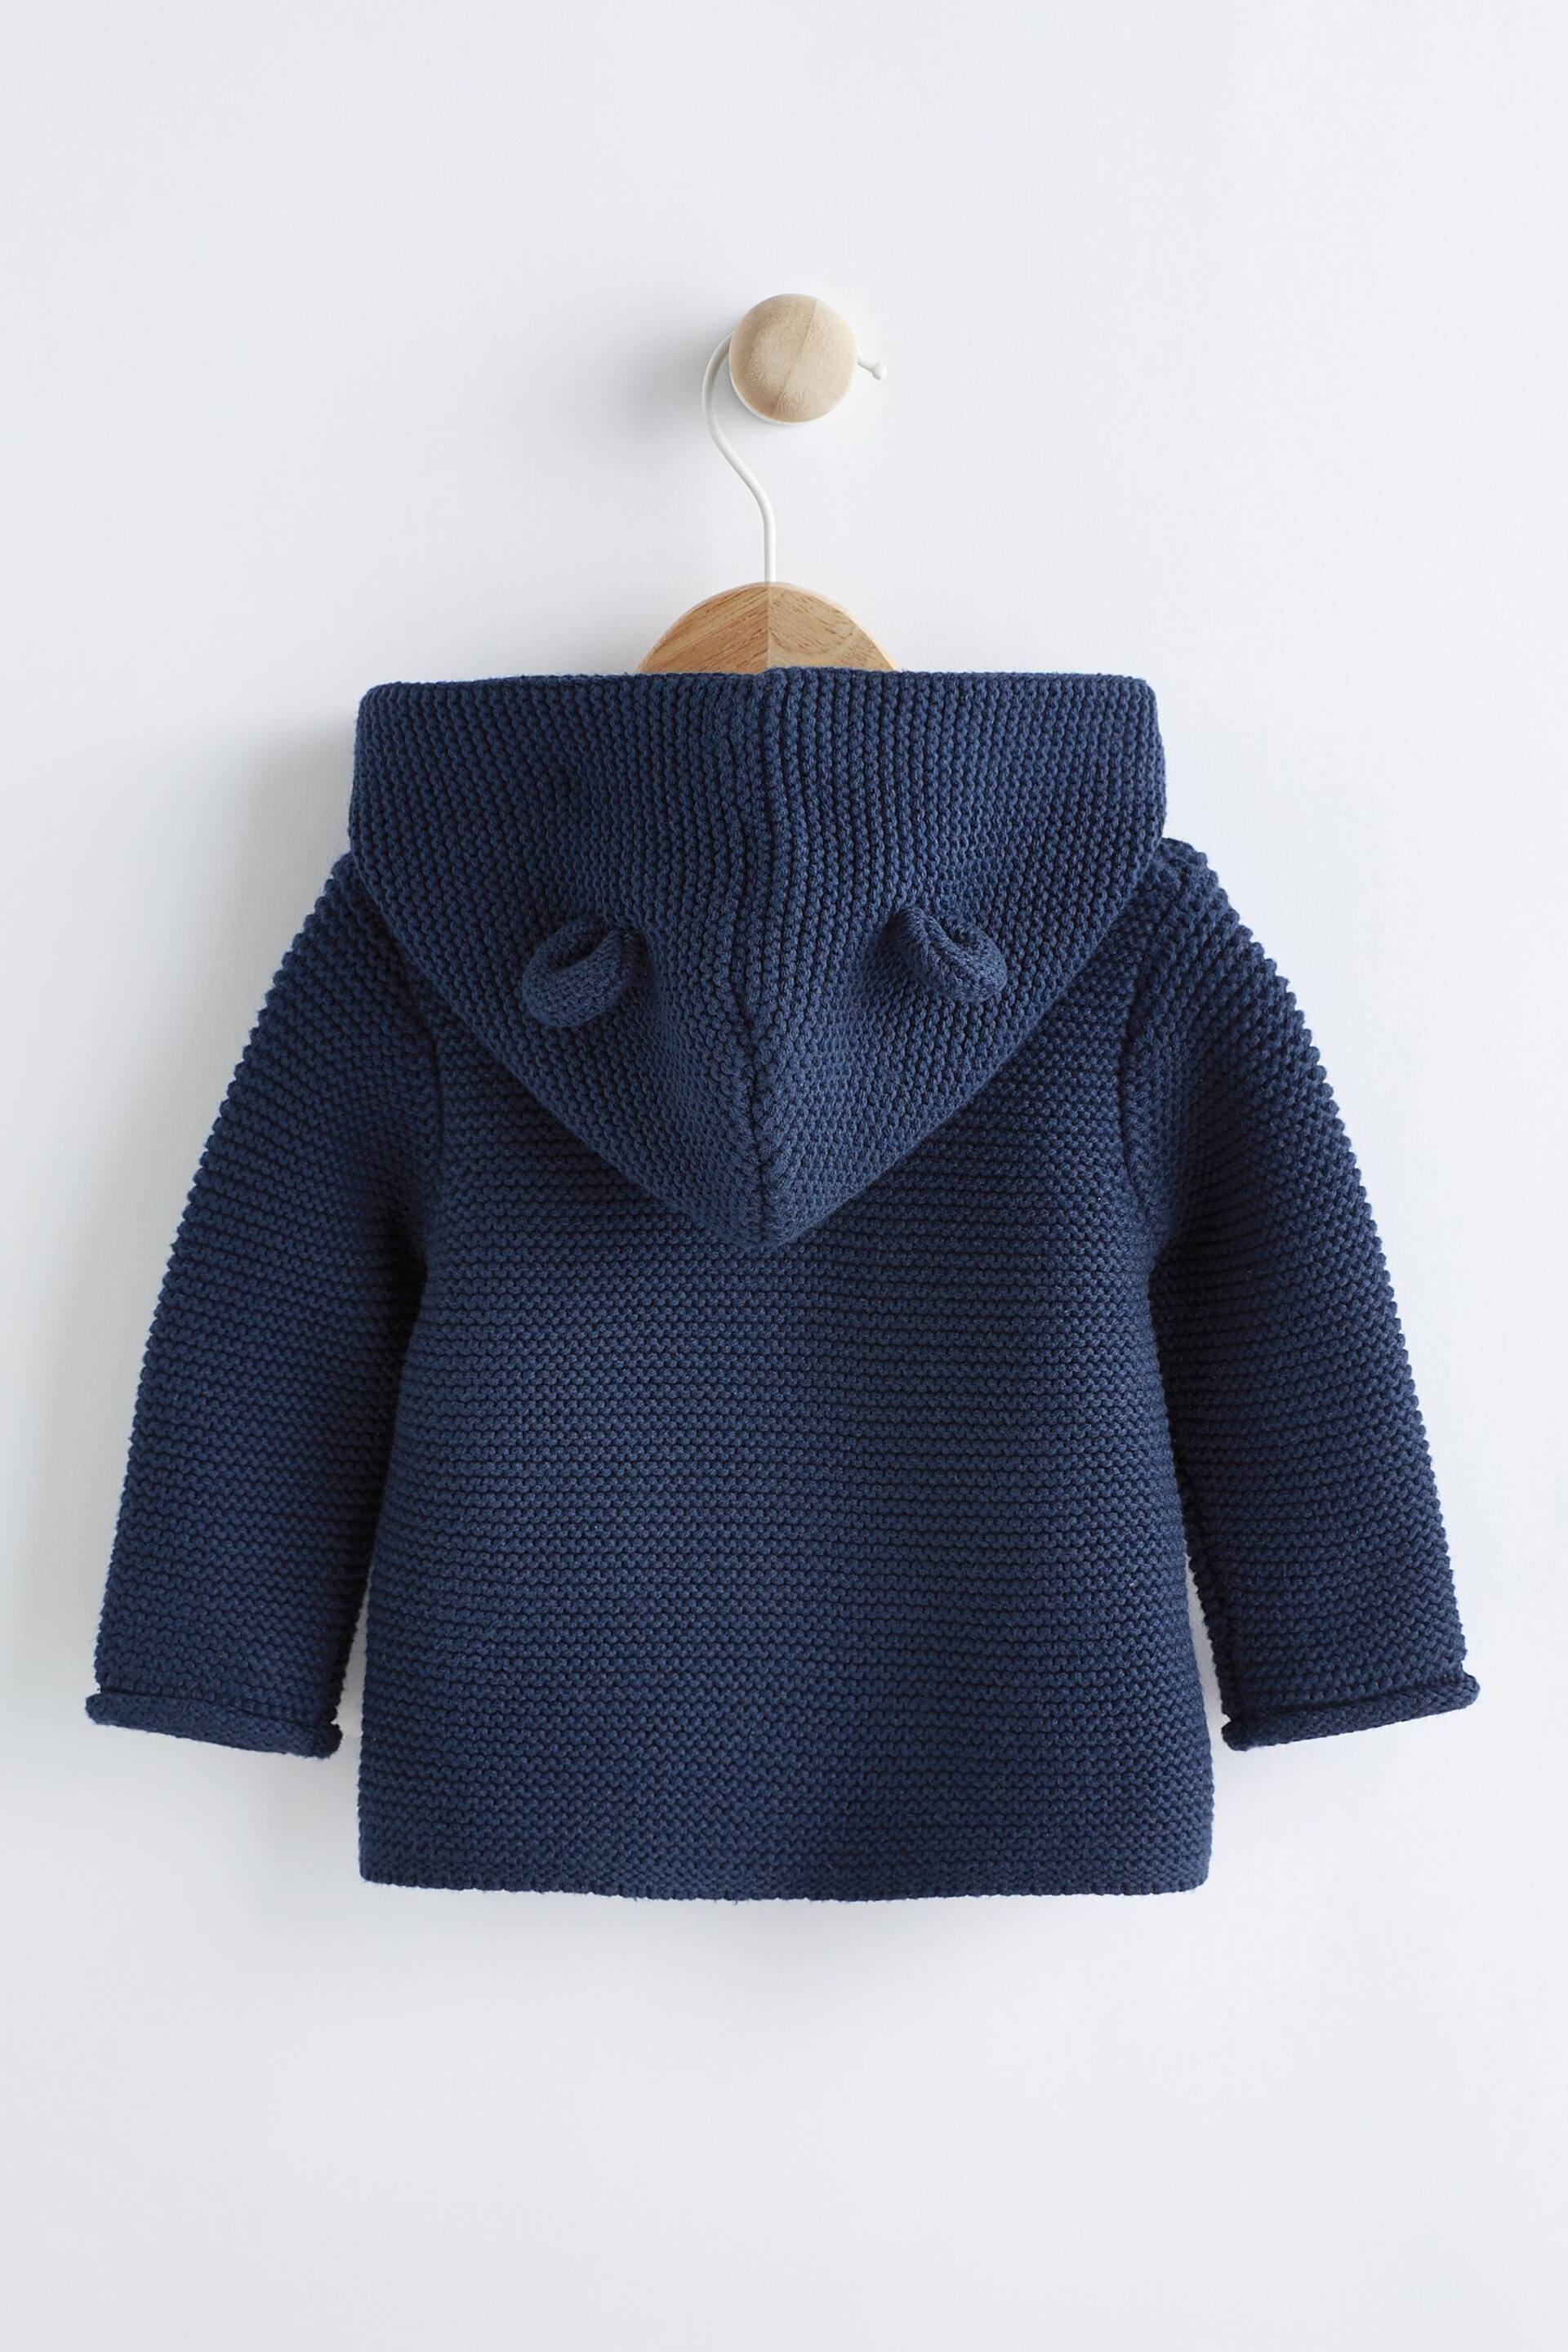 Blue Baby Knitted Cardigan (0mths-3yrs) - Image 2 of 5